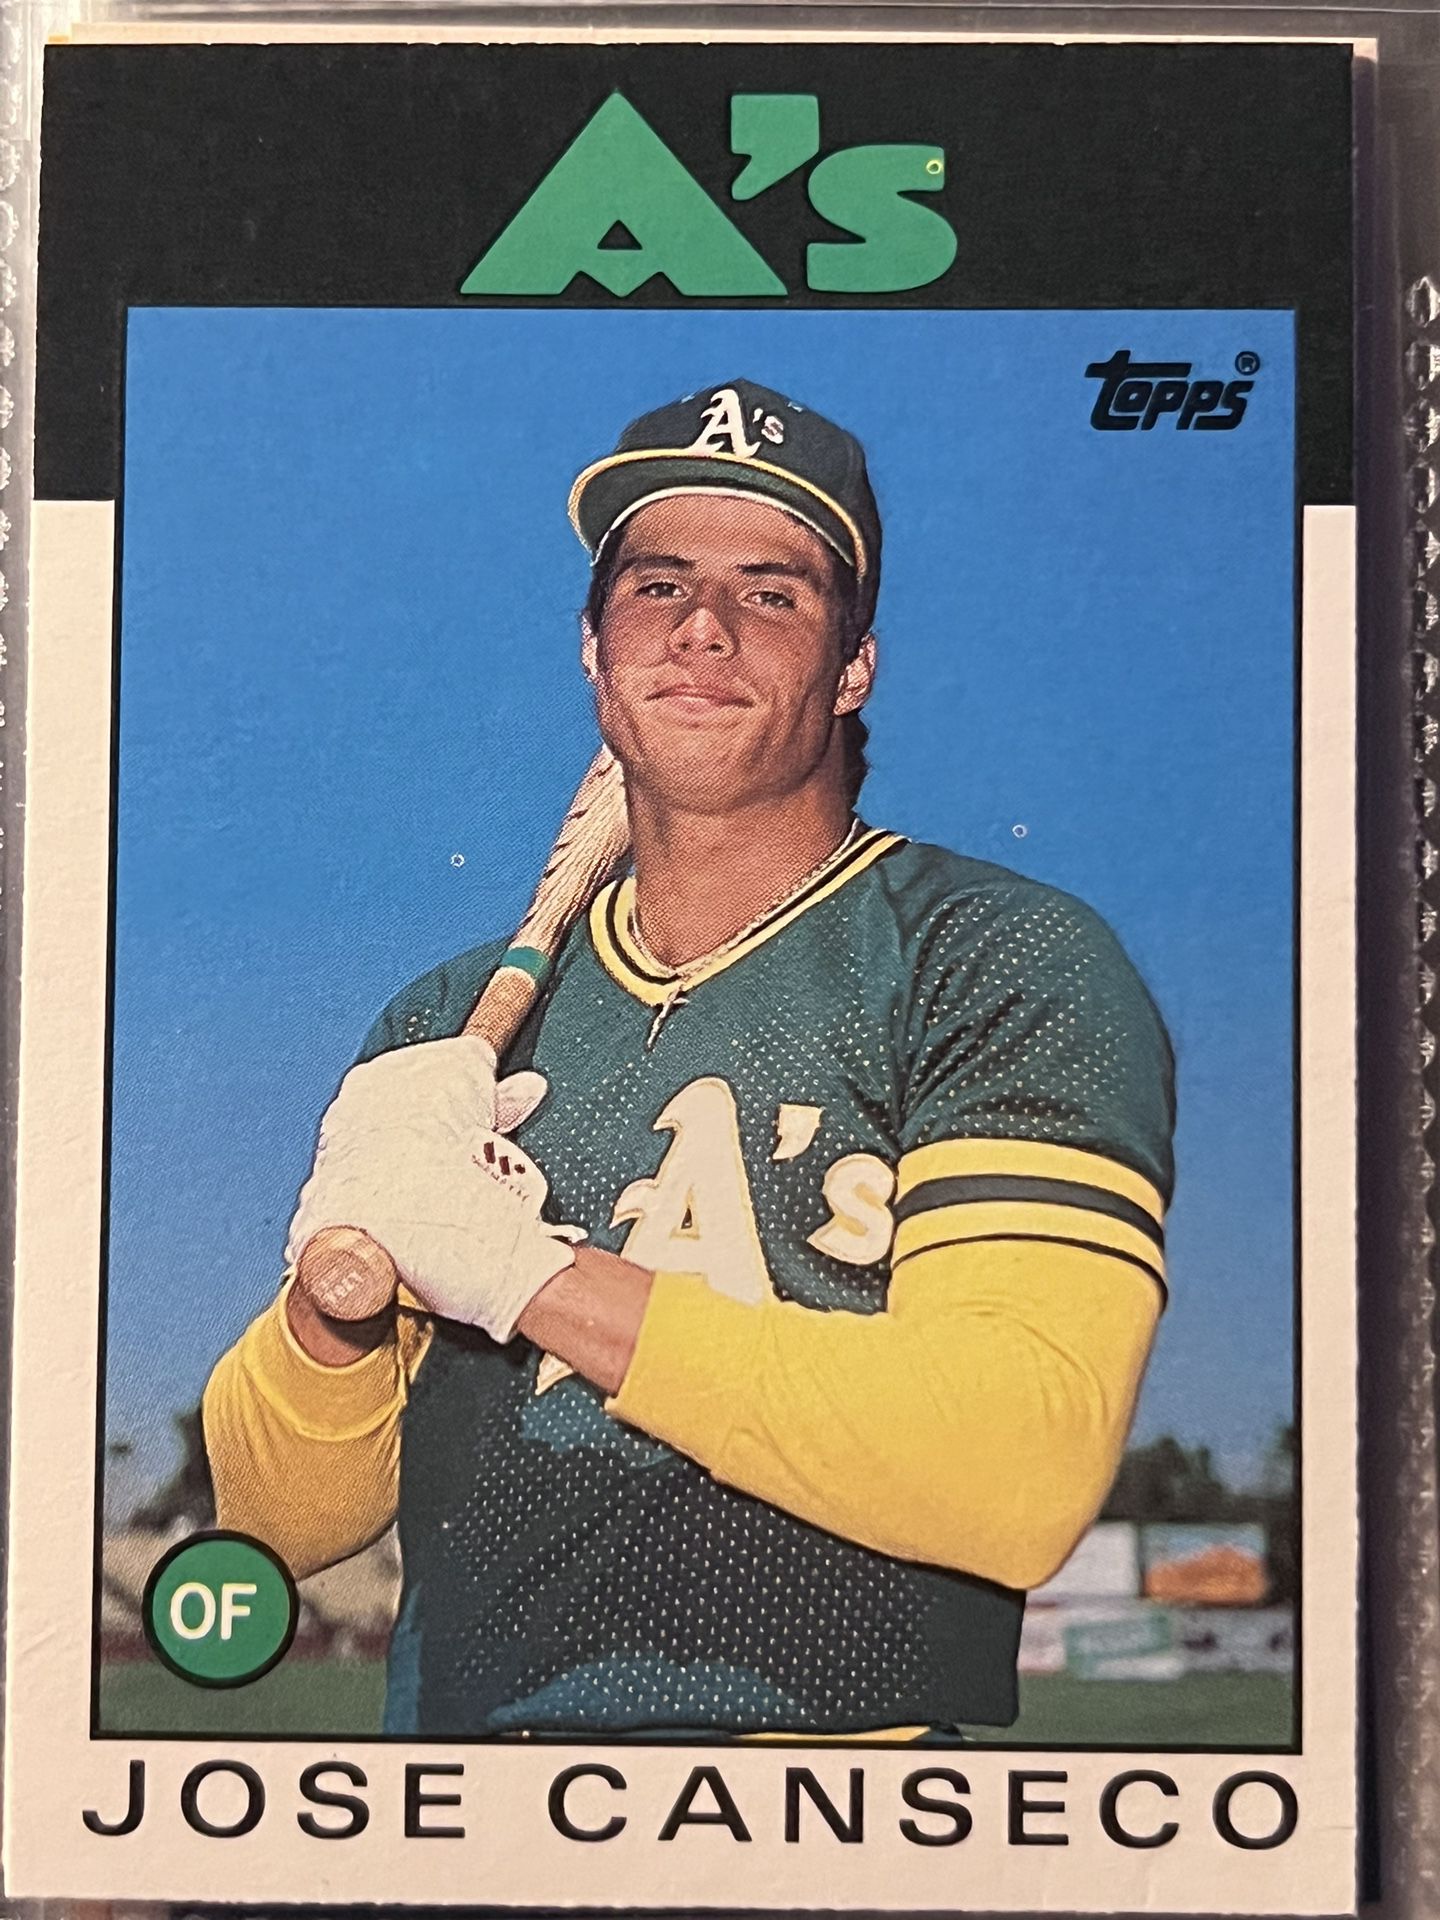 1986 Topps Tiffany Jose Canseco Rookie Card for Sale in Salt Lake